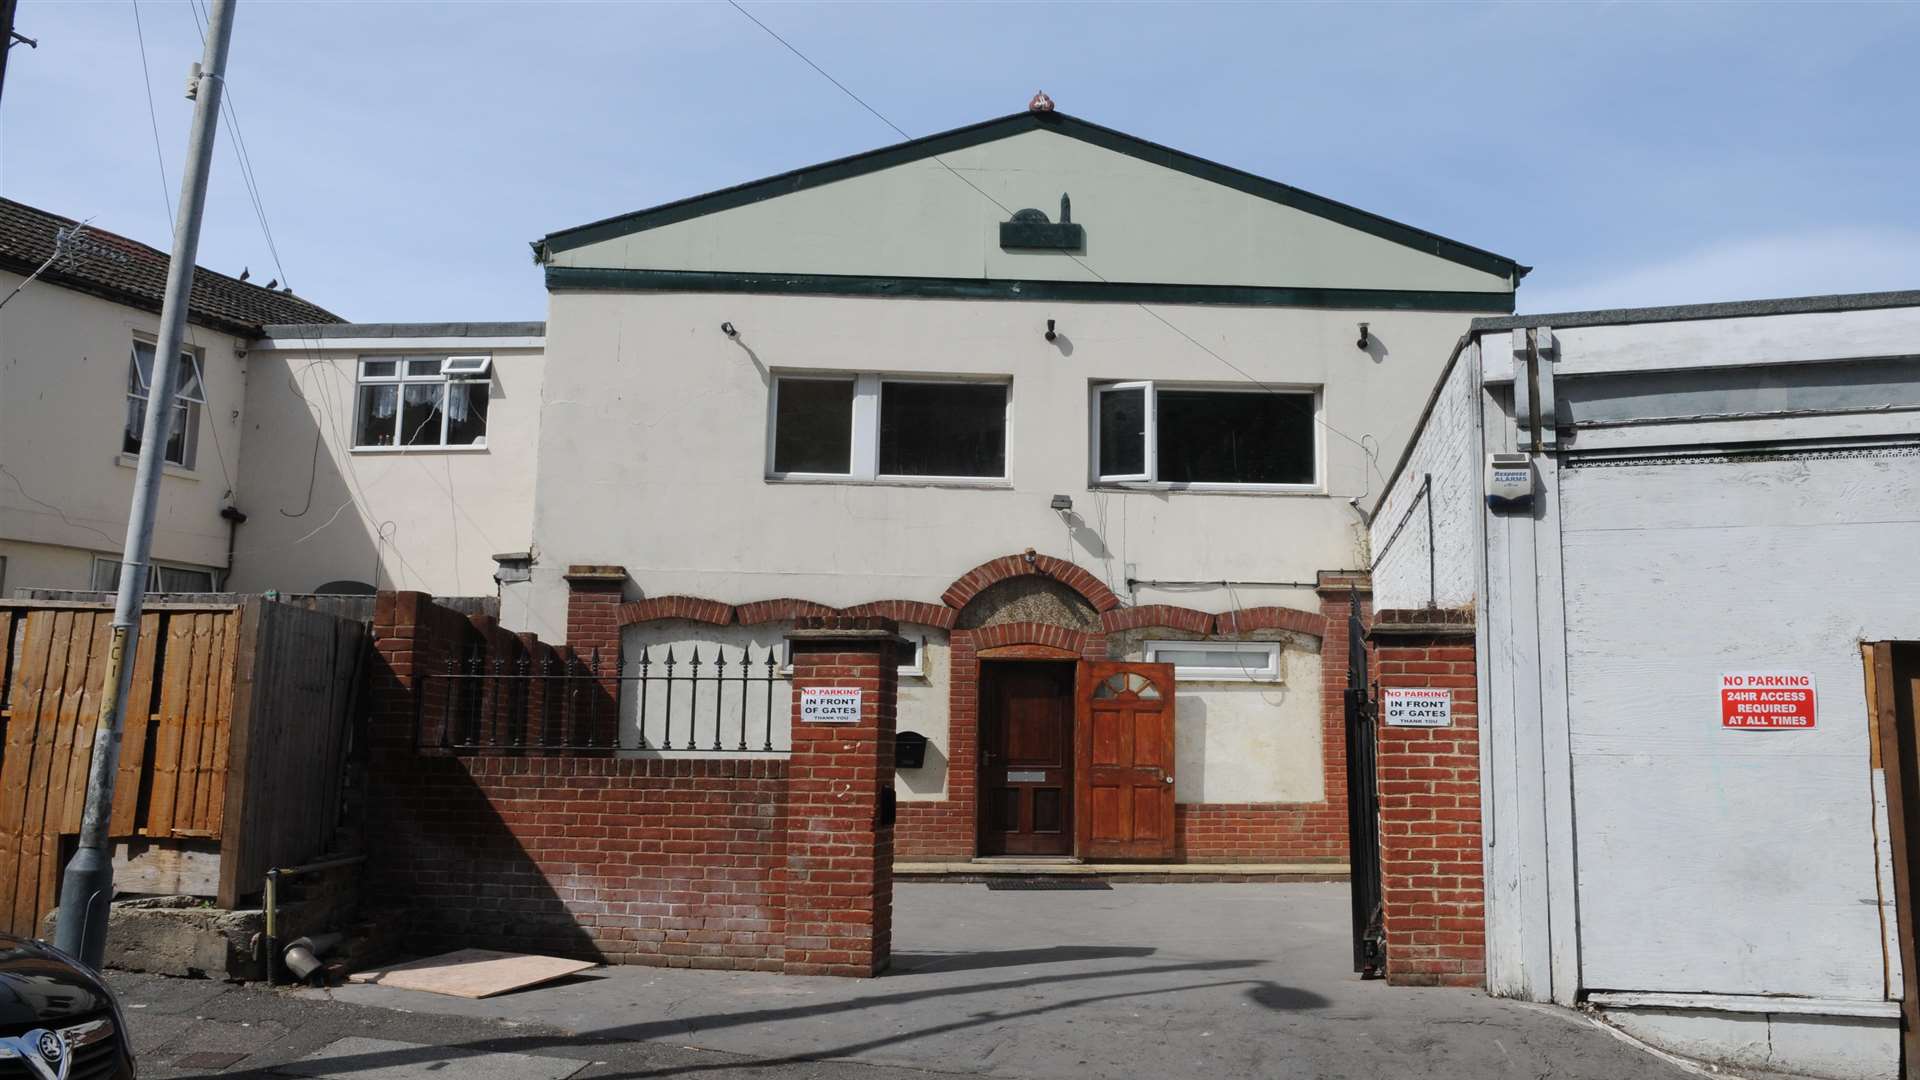 Folkestone Mosque was where the incident took place